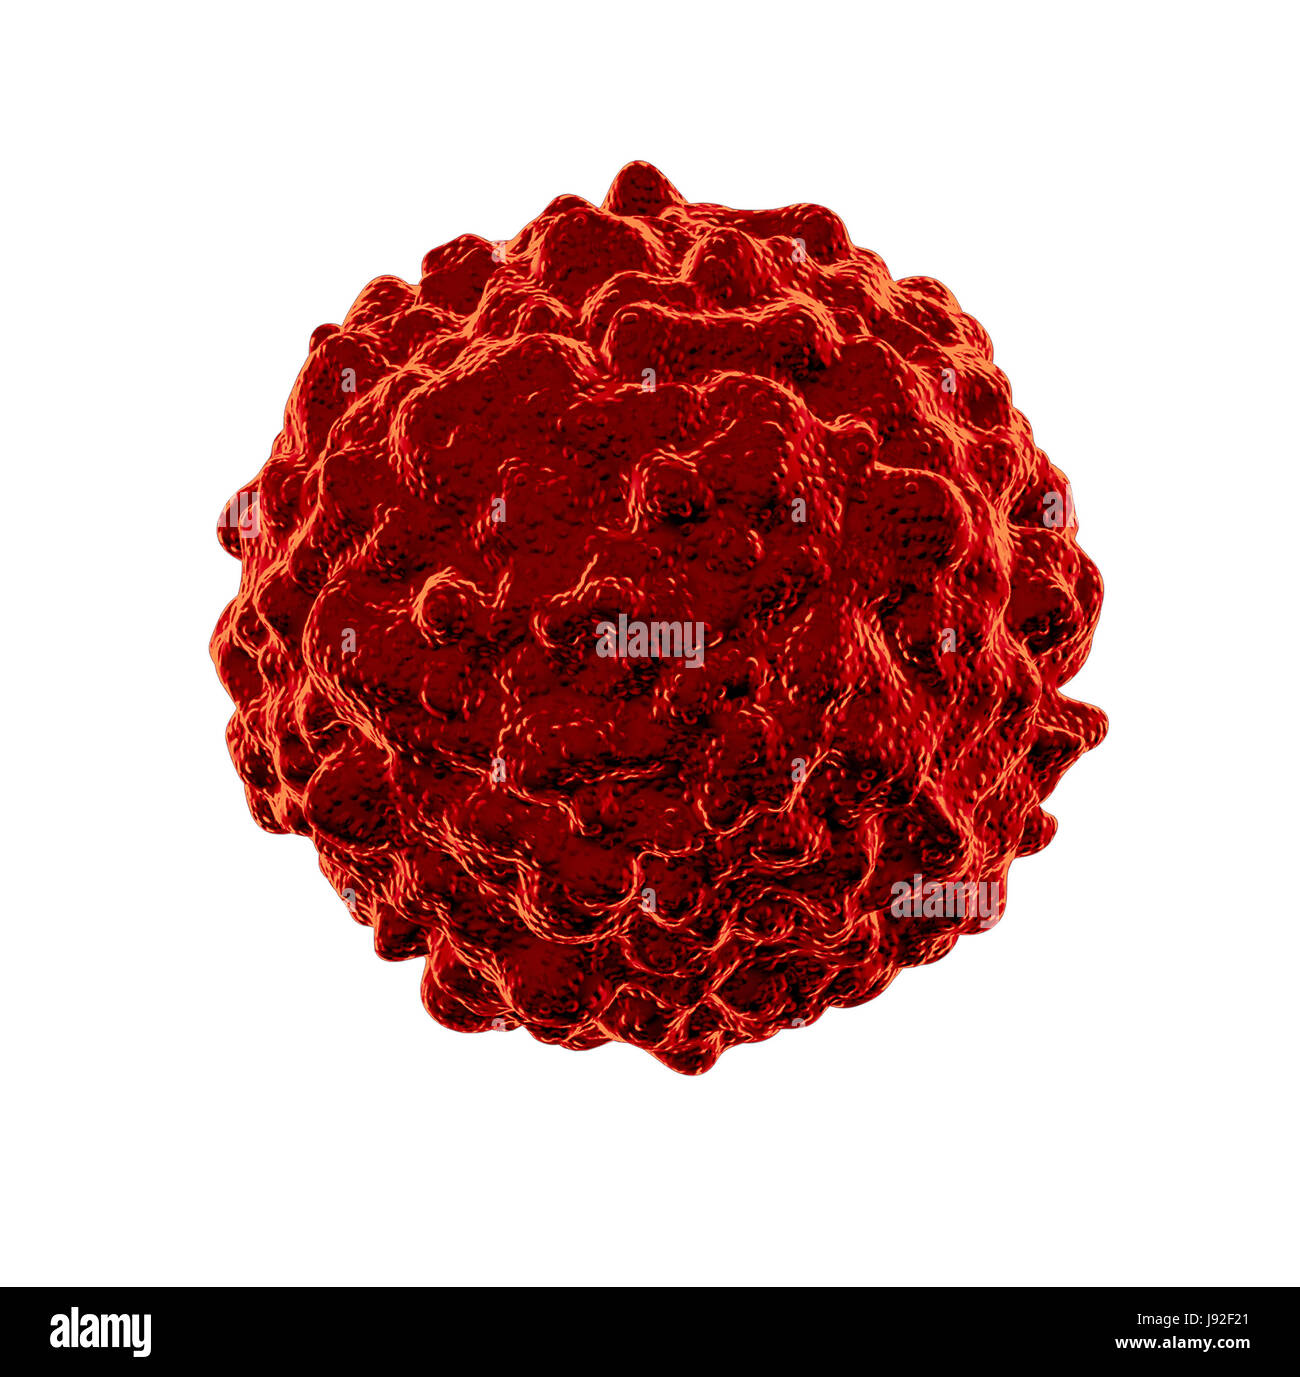 single, medicinally, medical, human, human being, virus, cancer, growth, means, Stock Photo